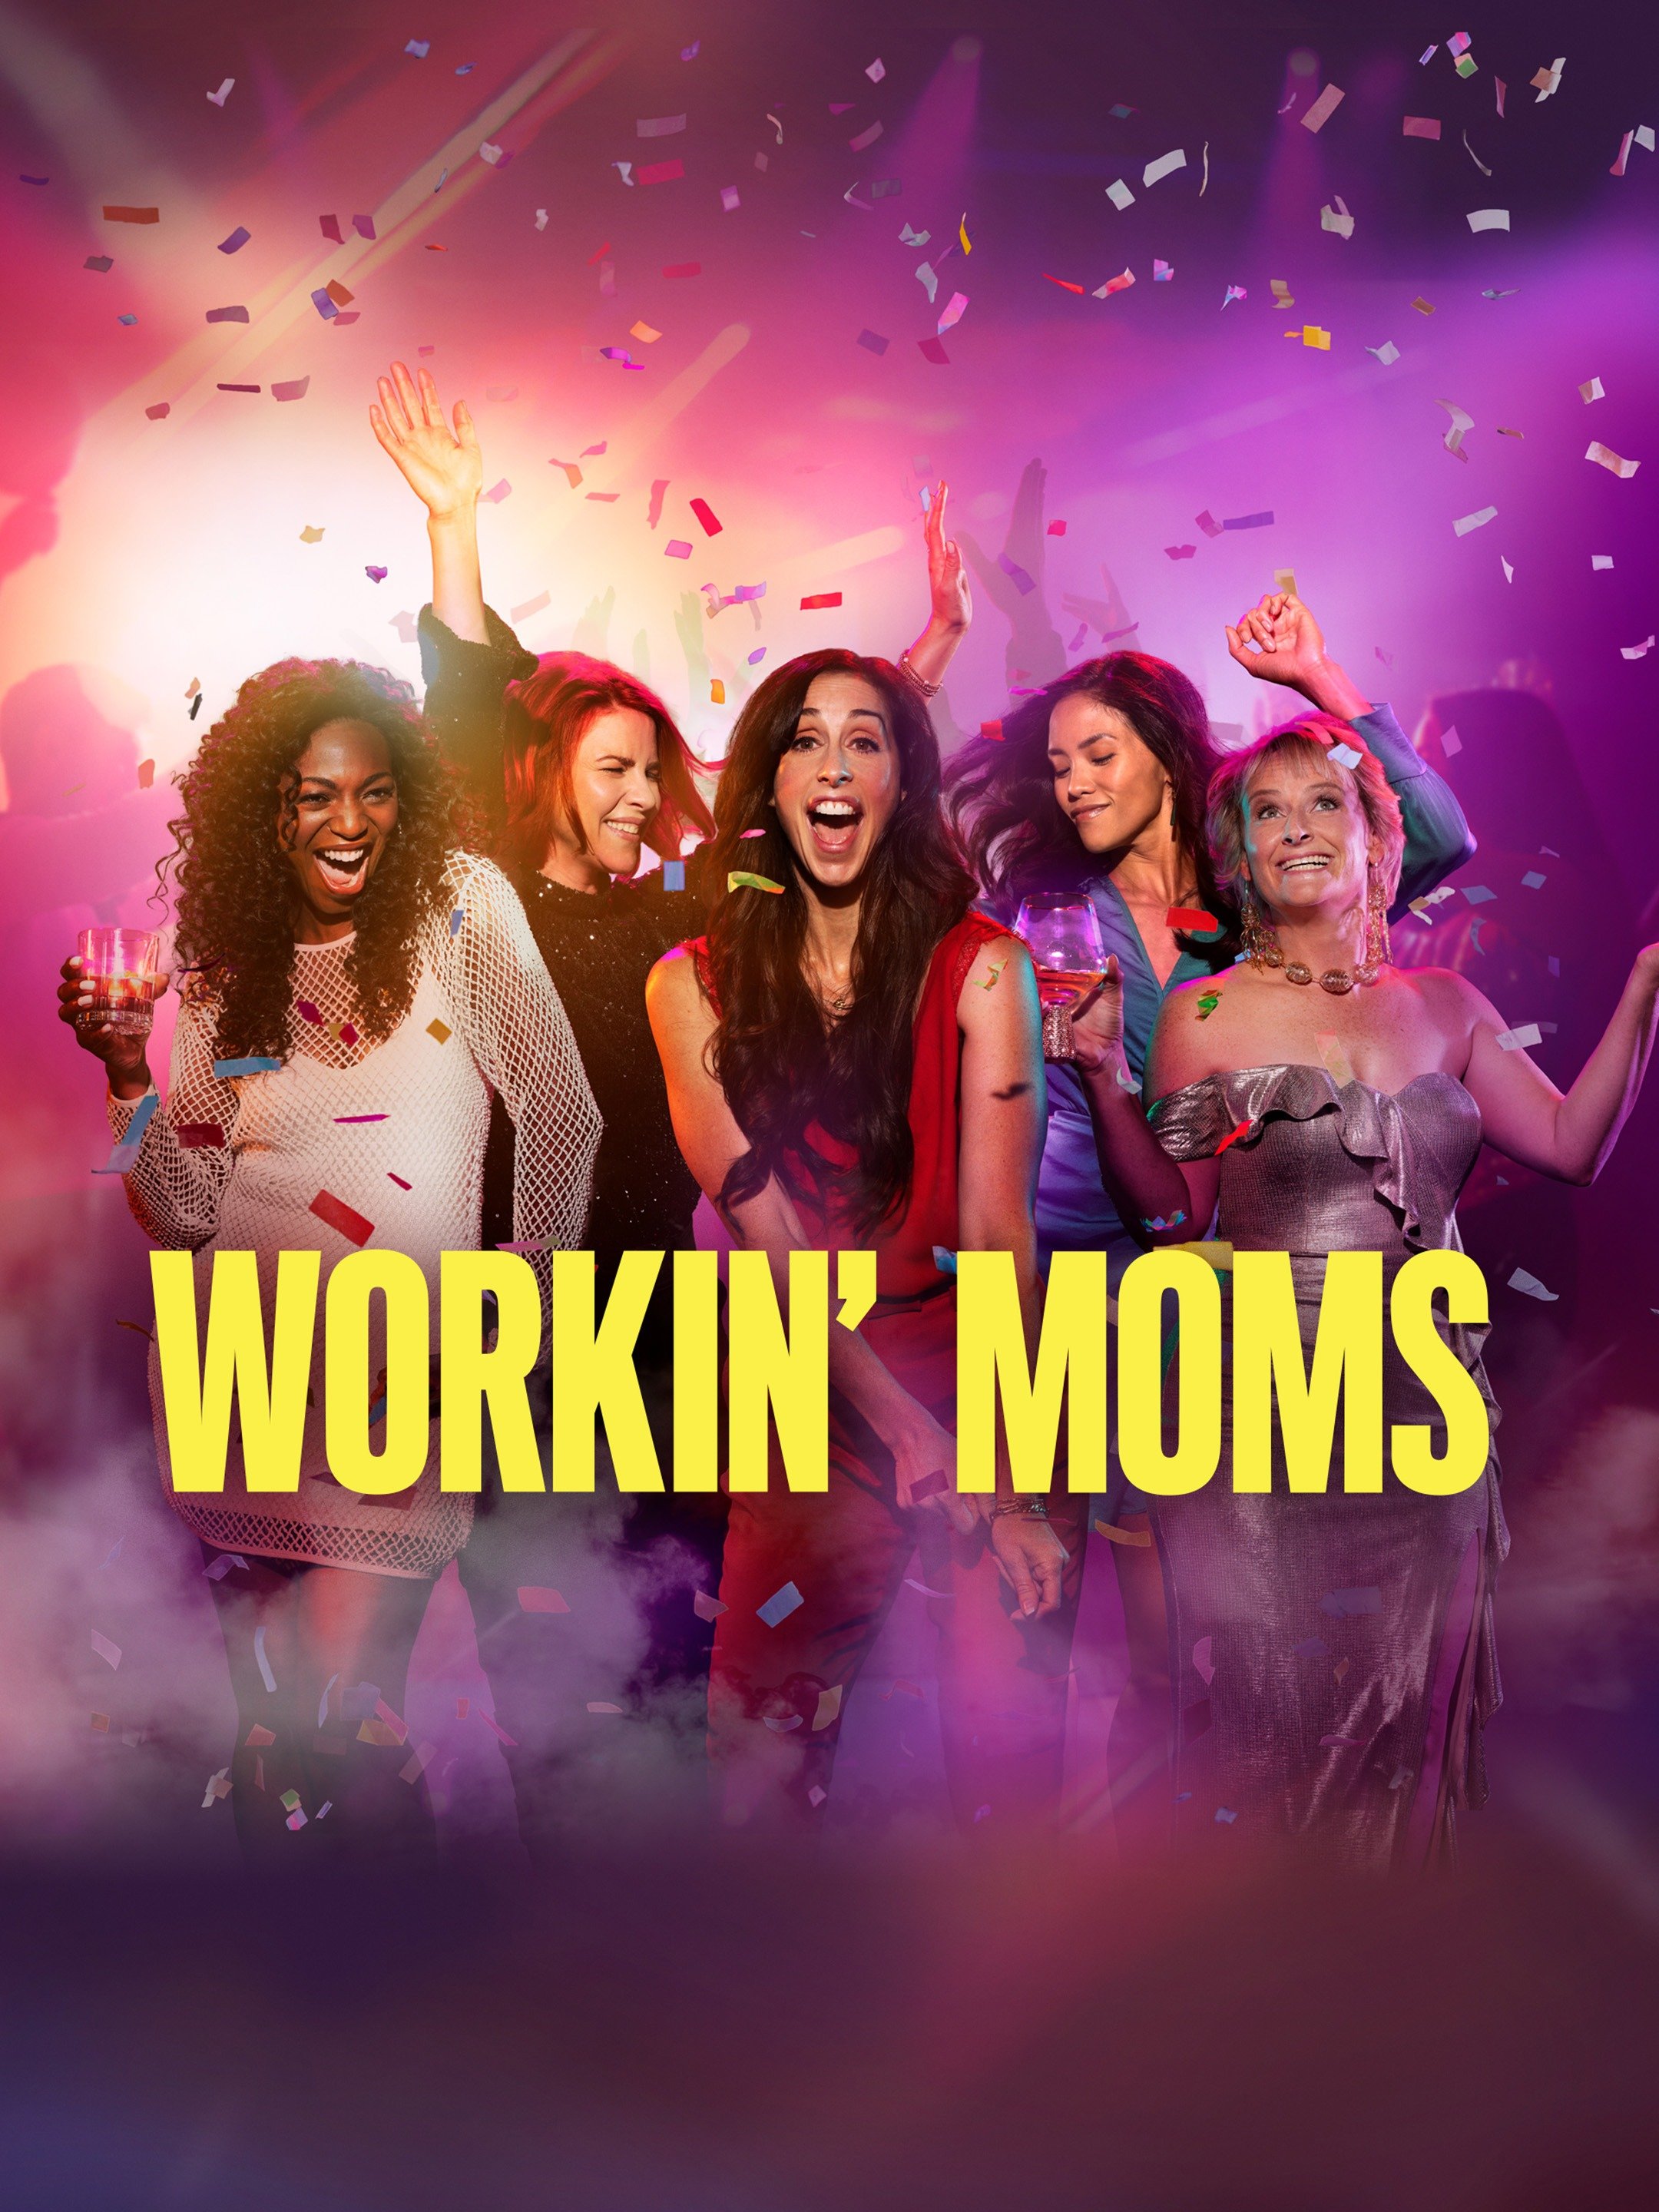 Moms Bang Forced - Workin' Moms - Rotten Tomatoes